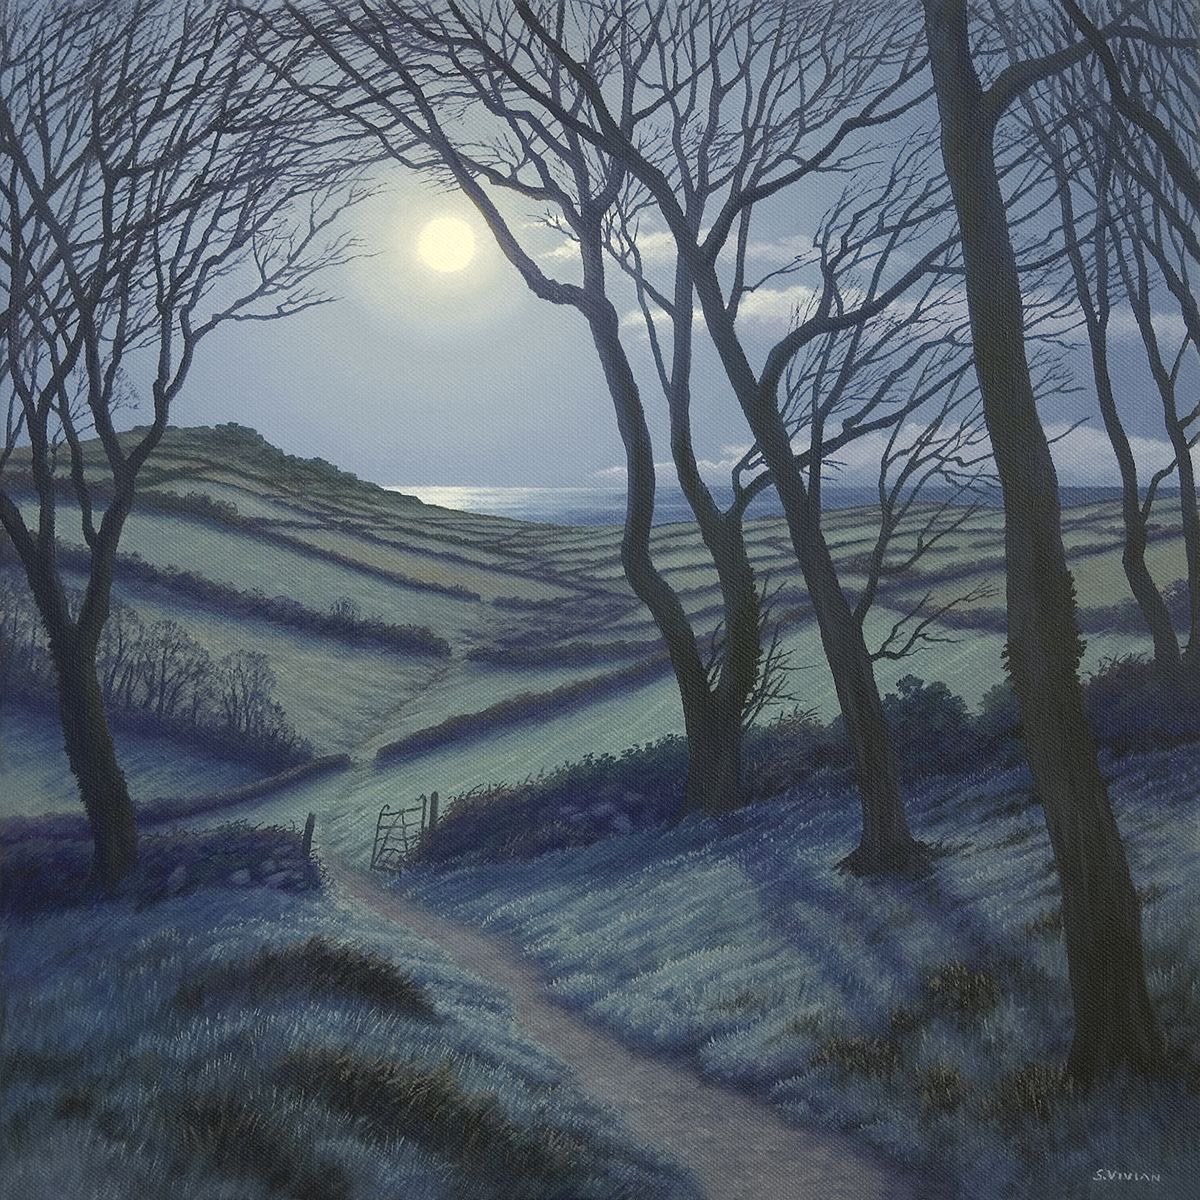 “The Gate”🎨
The moonlight valley 
West Penwith, Cornwall 

Artist Sarah Vivian

Goodnight ~
Till the morning light✨🌙